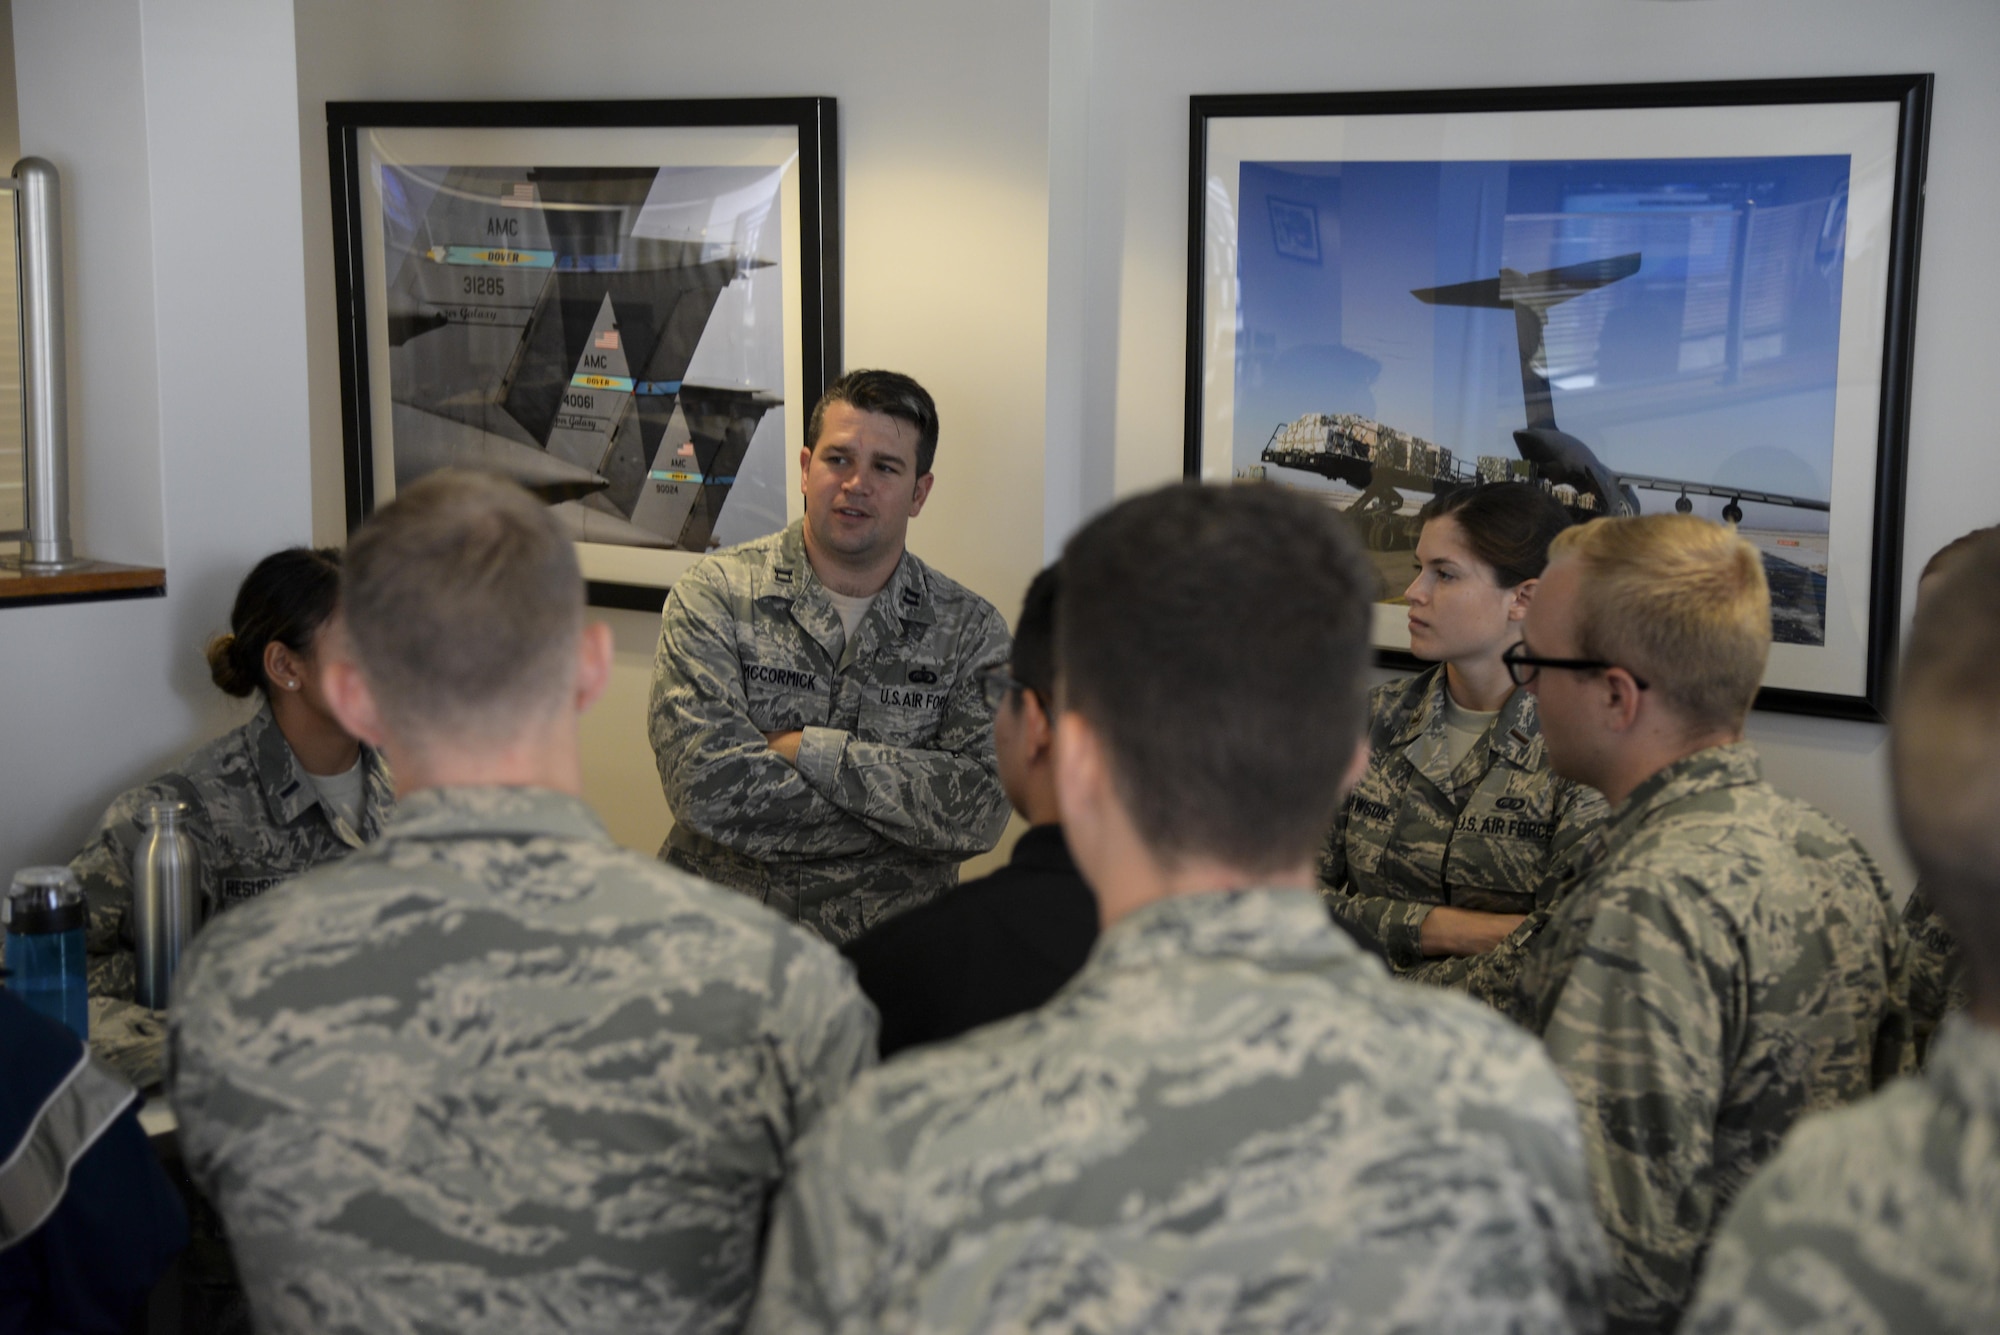 Capt. John McCormick, Air Force Mortuary Affairs Operations chief of the port mortuary branch, speaks to a group of ROTC cadets about his experiences as an active duty officer Oct. 11, 2017, during a Pathways to Blue tour at Dover Air Force Base, Del. About 40 local cadets had the chance to speak with company grade officers about their experiences in ROTC and how it correlated into their active duty career. (U.S. Air Force photo by Staff Sgt. Aaron J. Jenne)